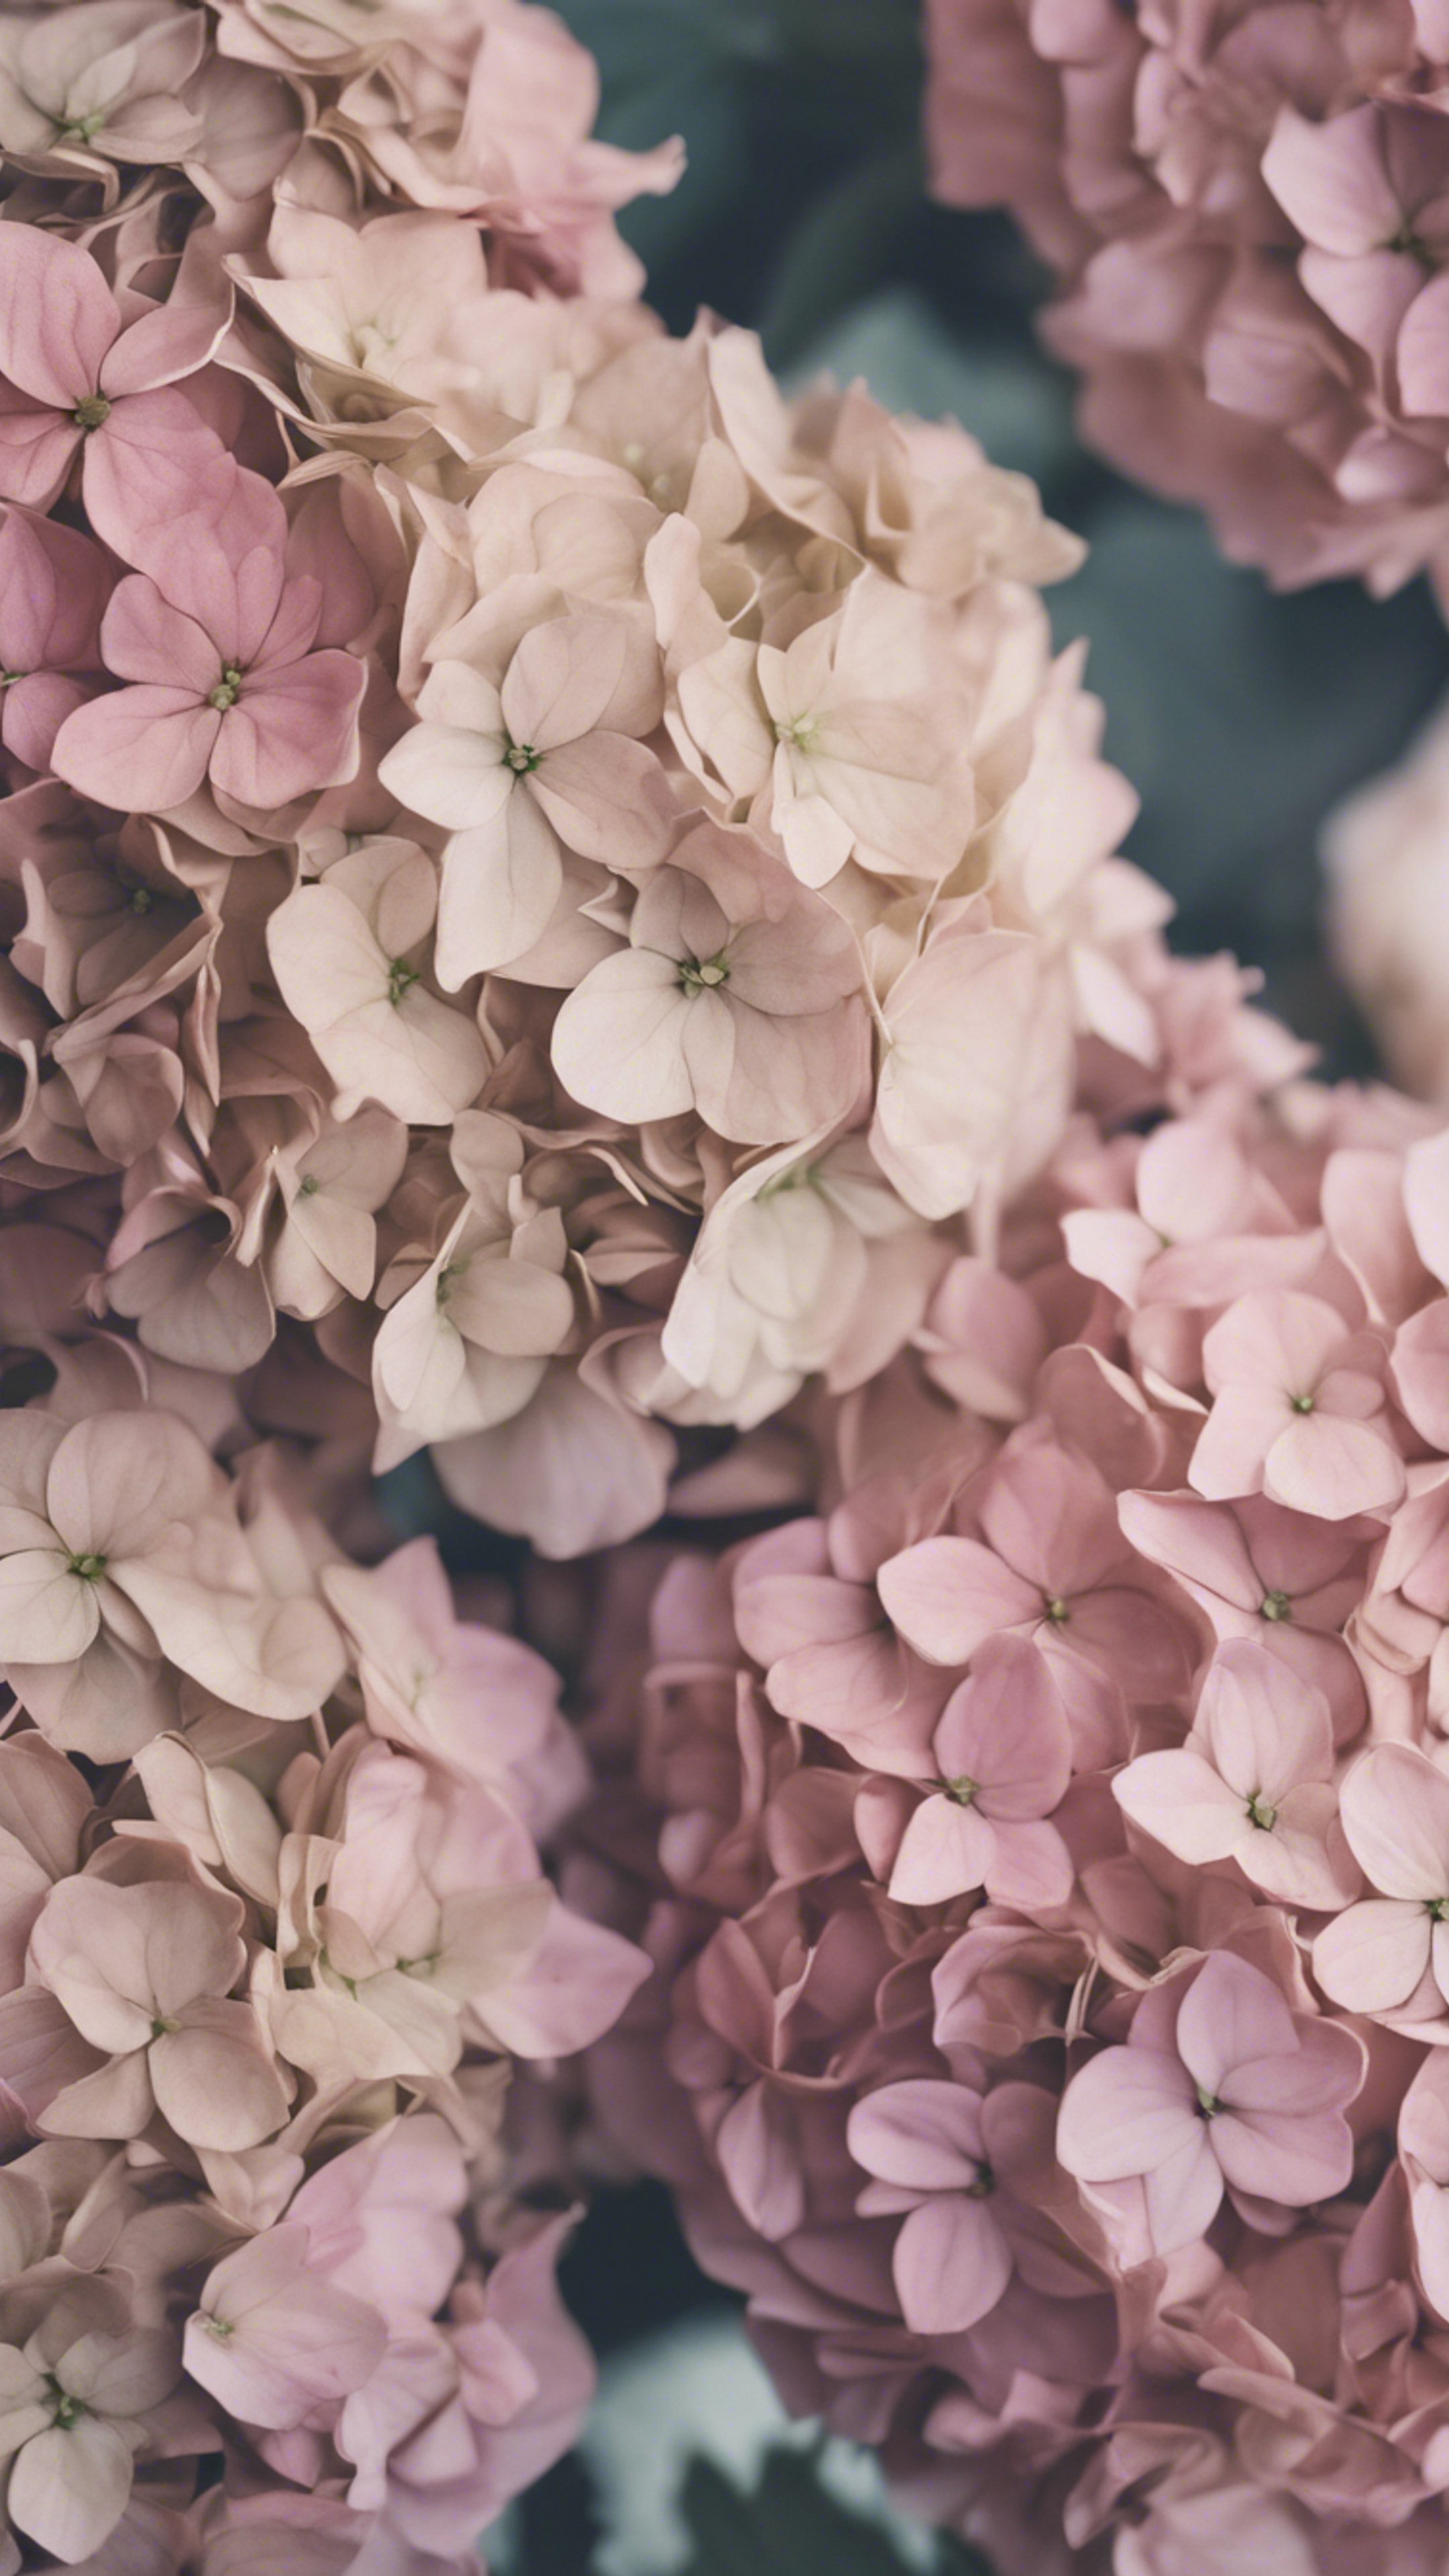 An antique floral pattern with delicate hydrangeas in a hue of vintage pink. Обои[d61dab8ff010416797b3]